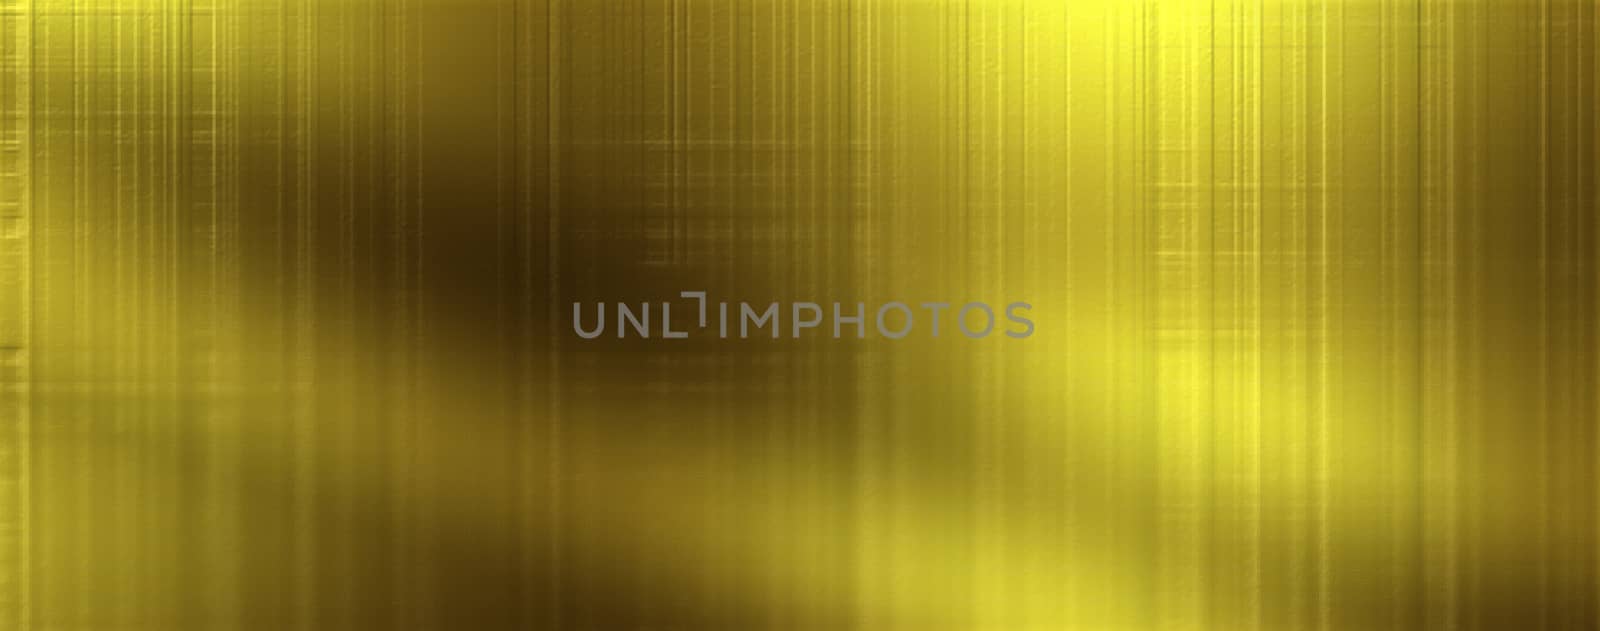 Gold Texture Panoramic Background by sherj